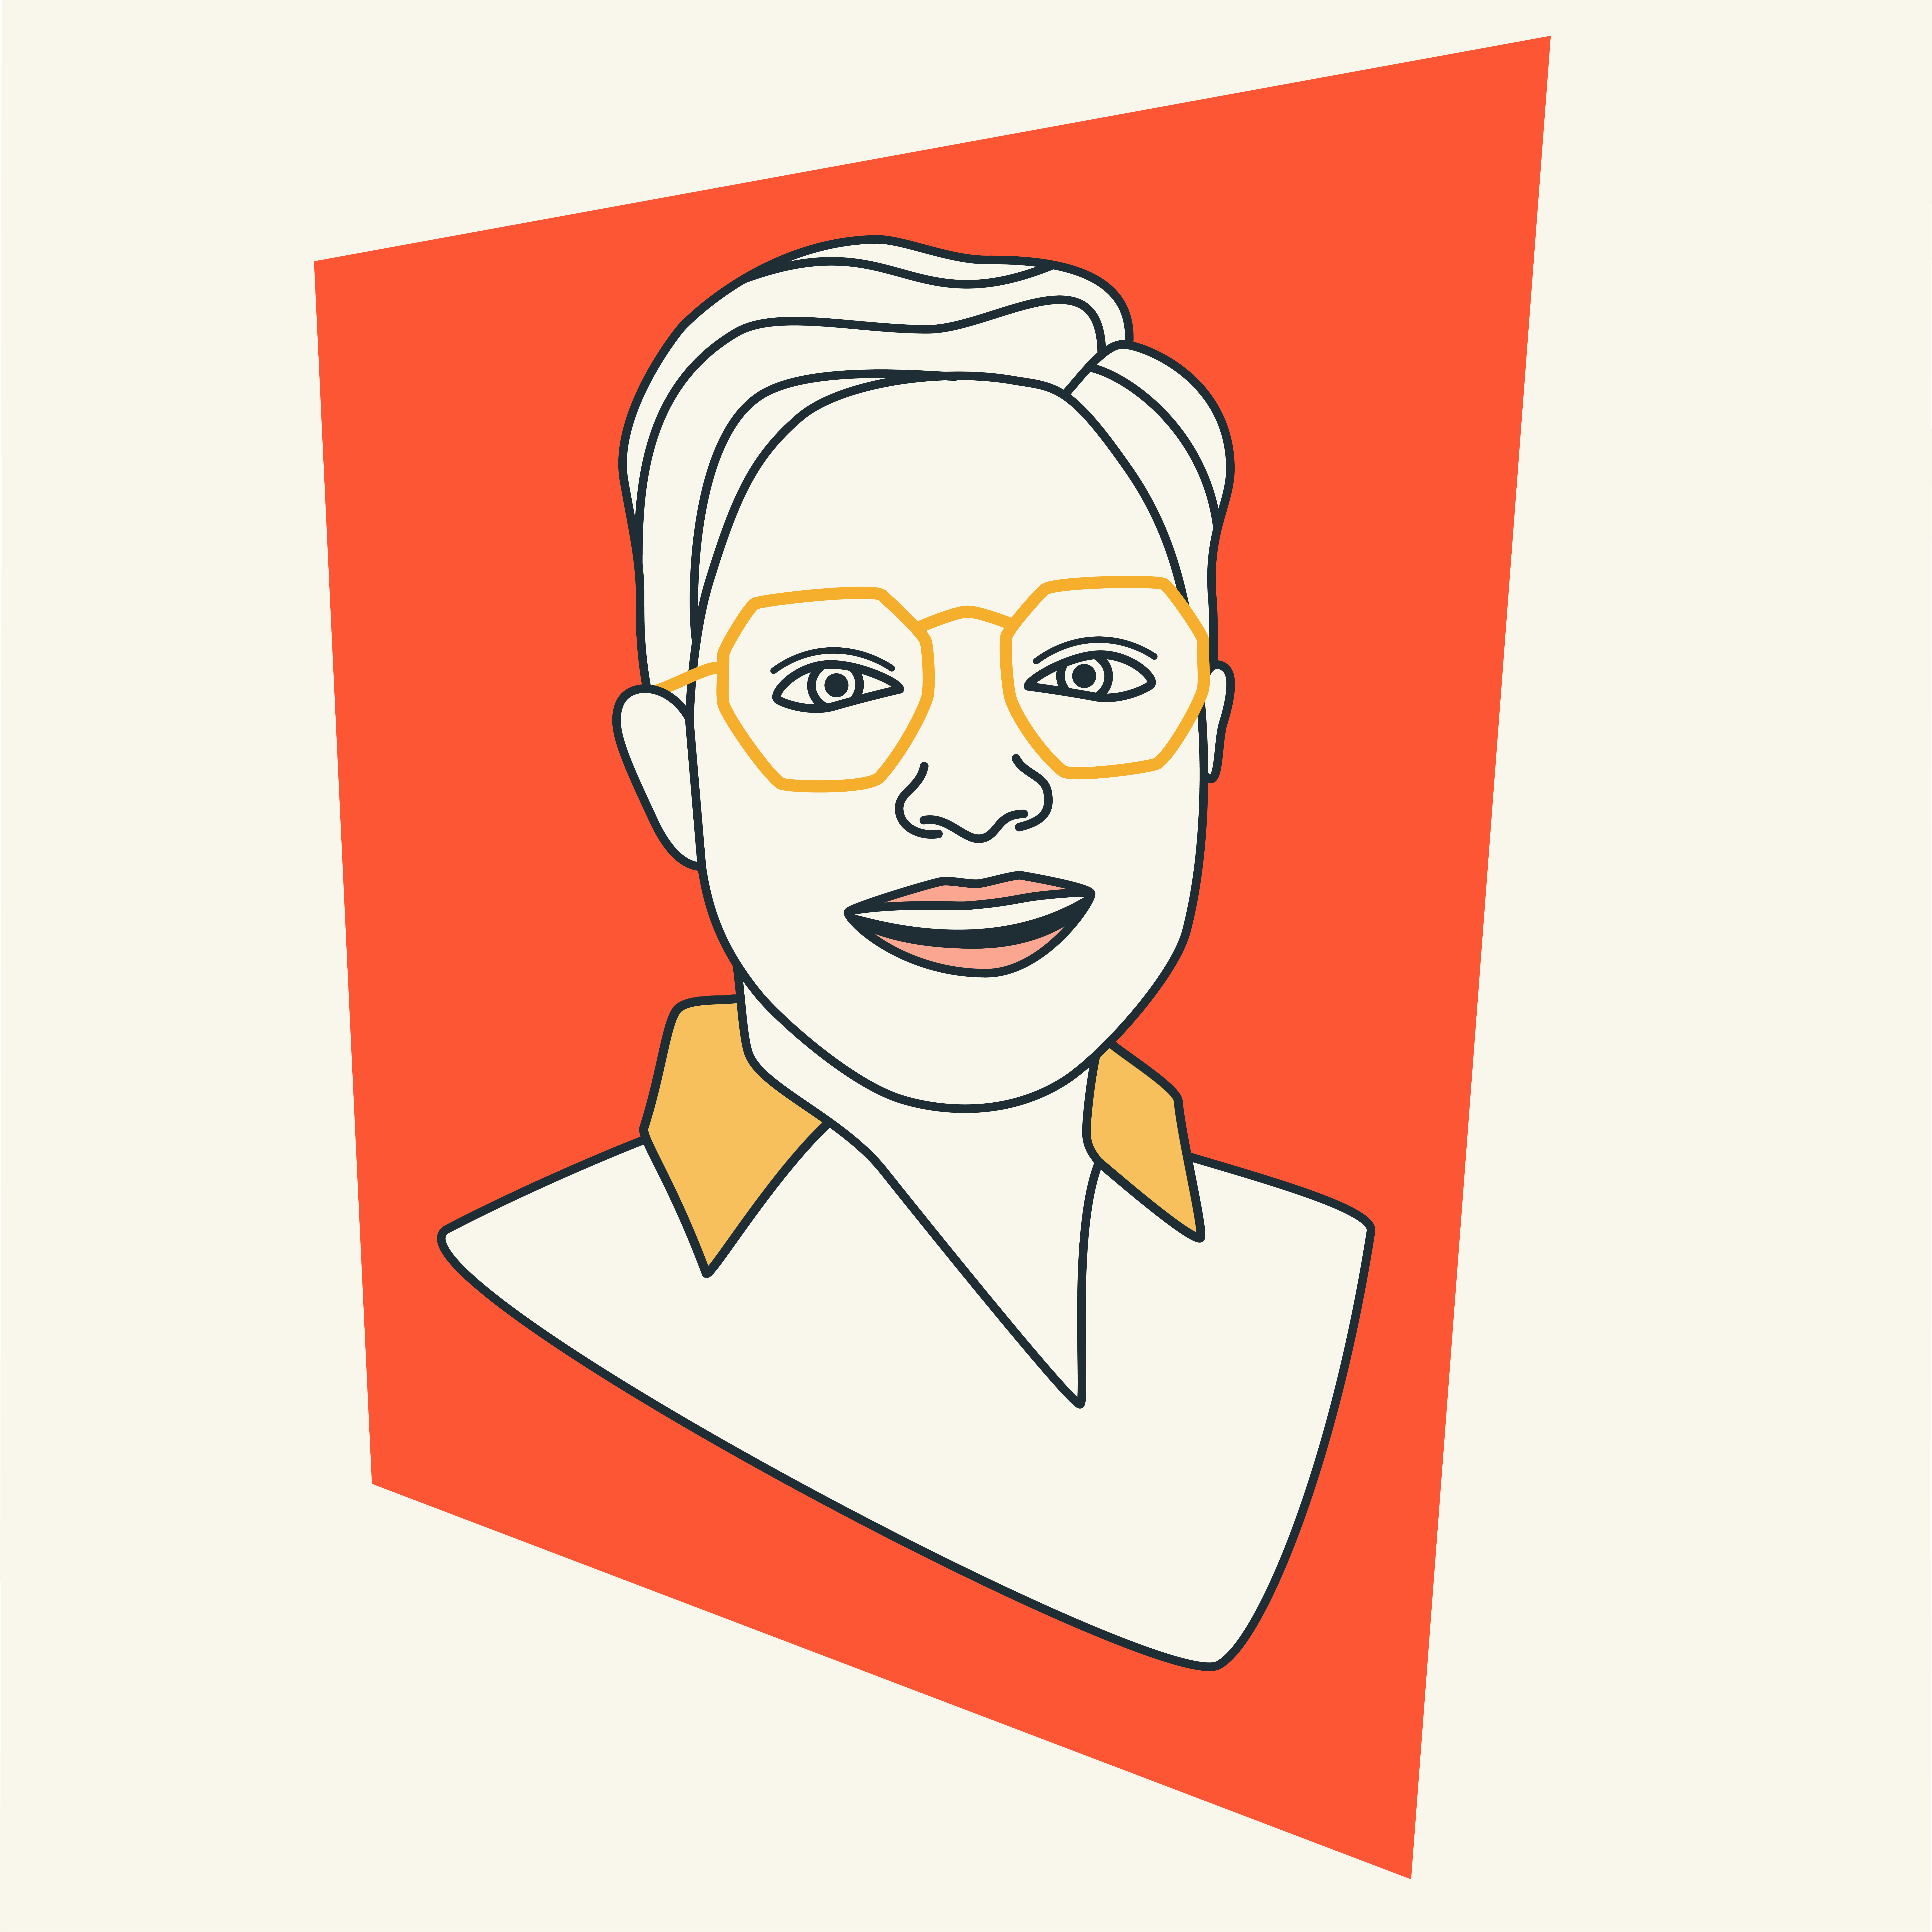 a line-drawn headshot of Emilia wearing a collared shirt with yellow glasses and an orange background